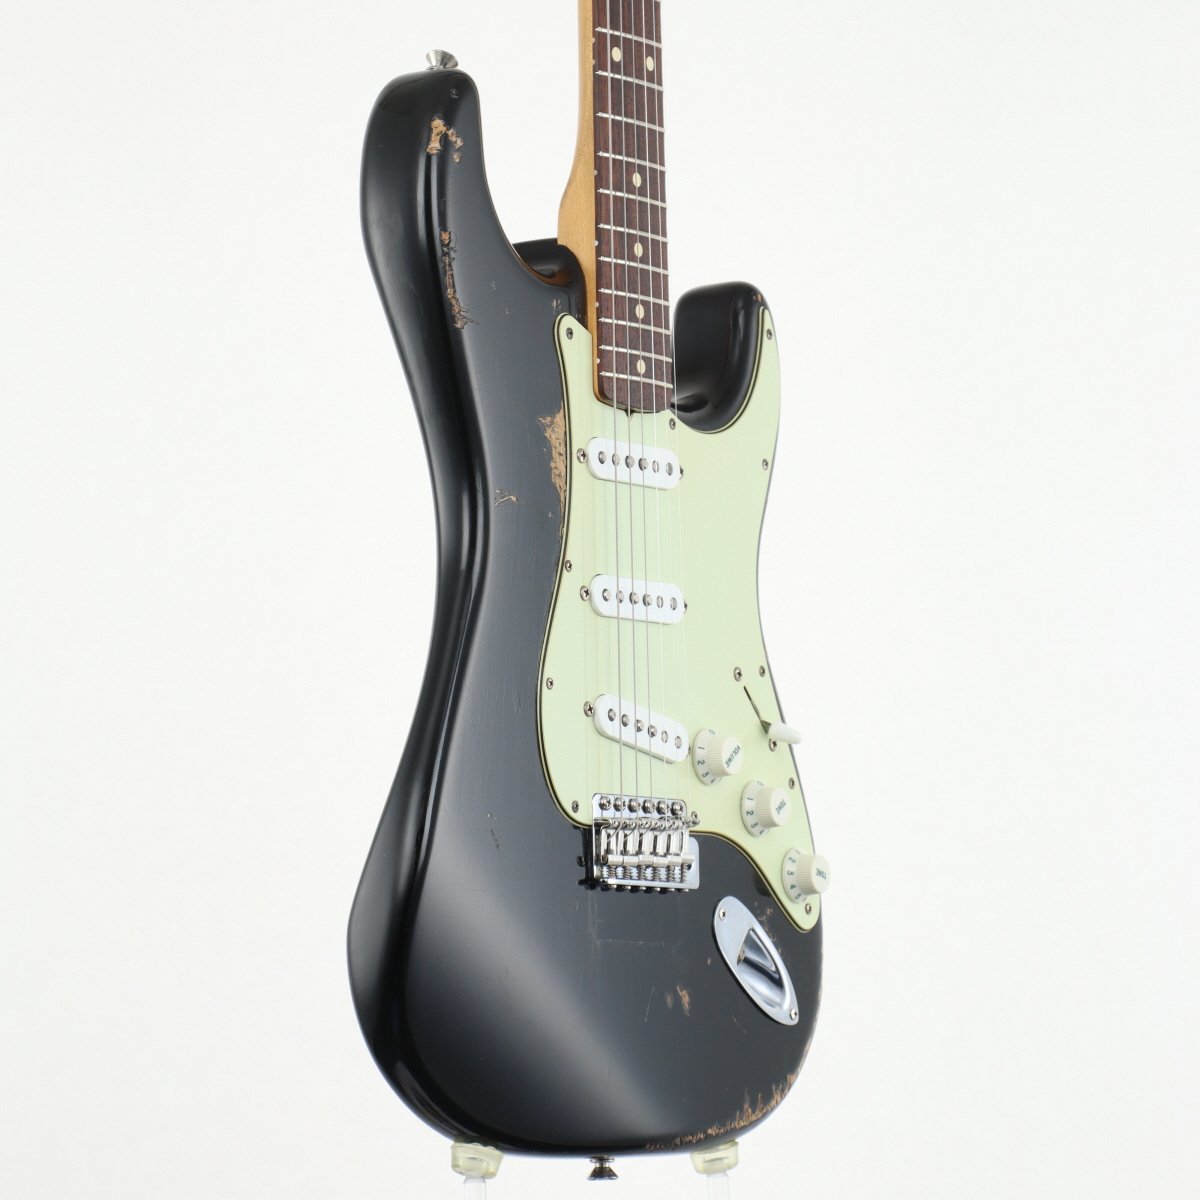 [SN MX10204456] USED Fender Mexico Fender Mexico / Classic 60s Stratocaster Mod Black [20]